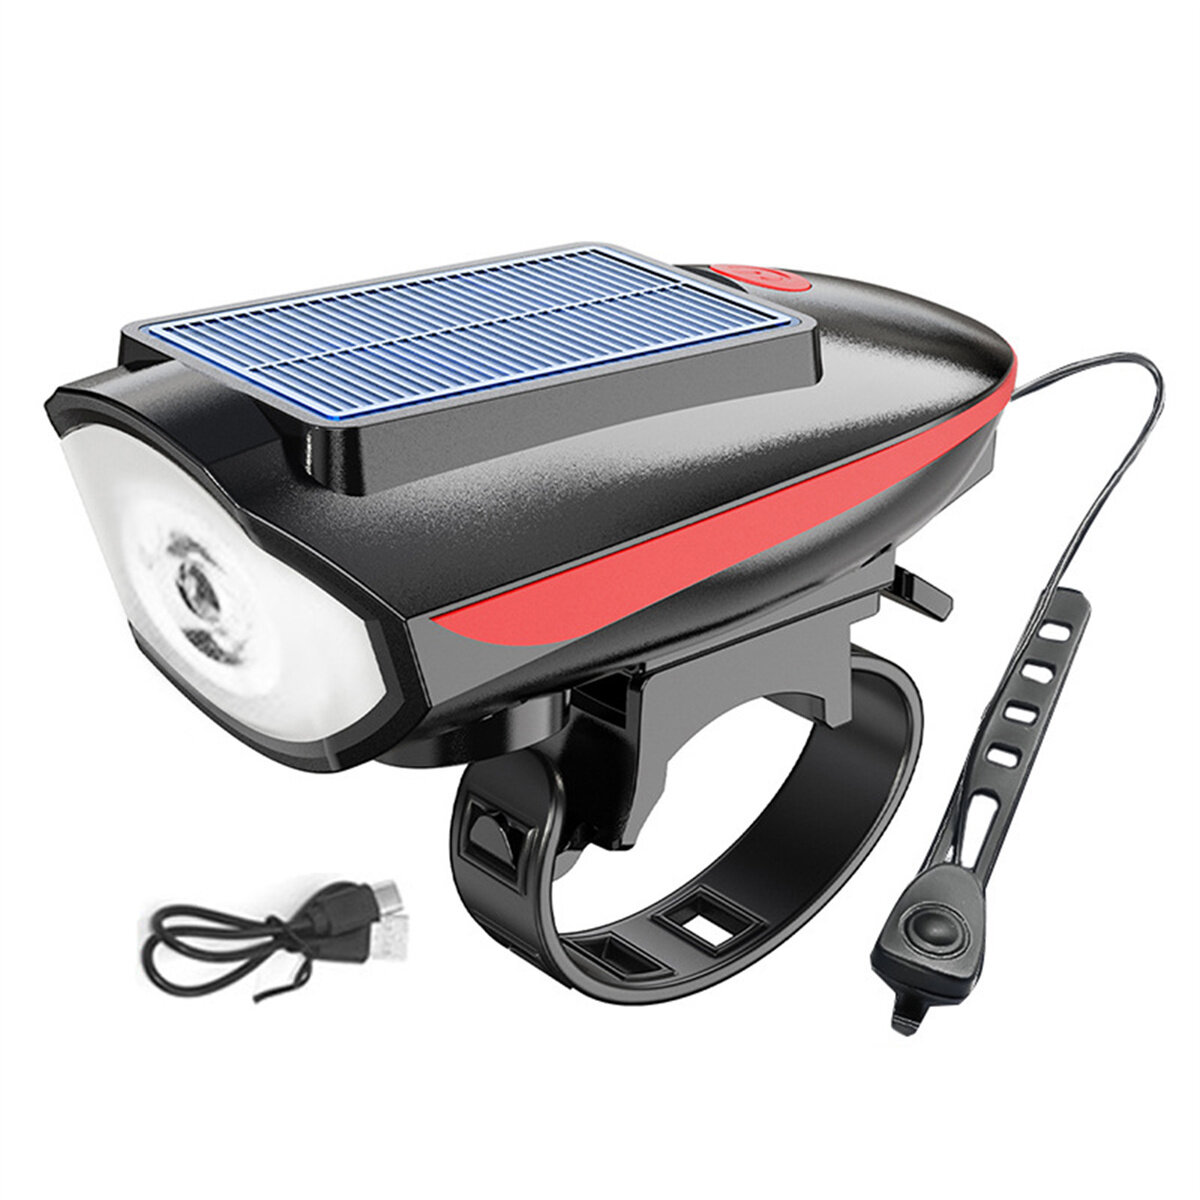 best price,cansses,in,solar,bike,xpe,lamp,1200mah,with,120db,horn,discount